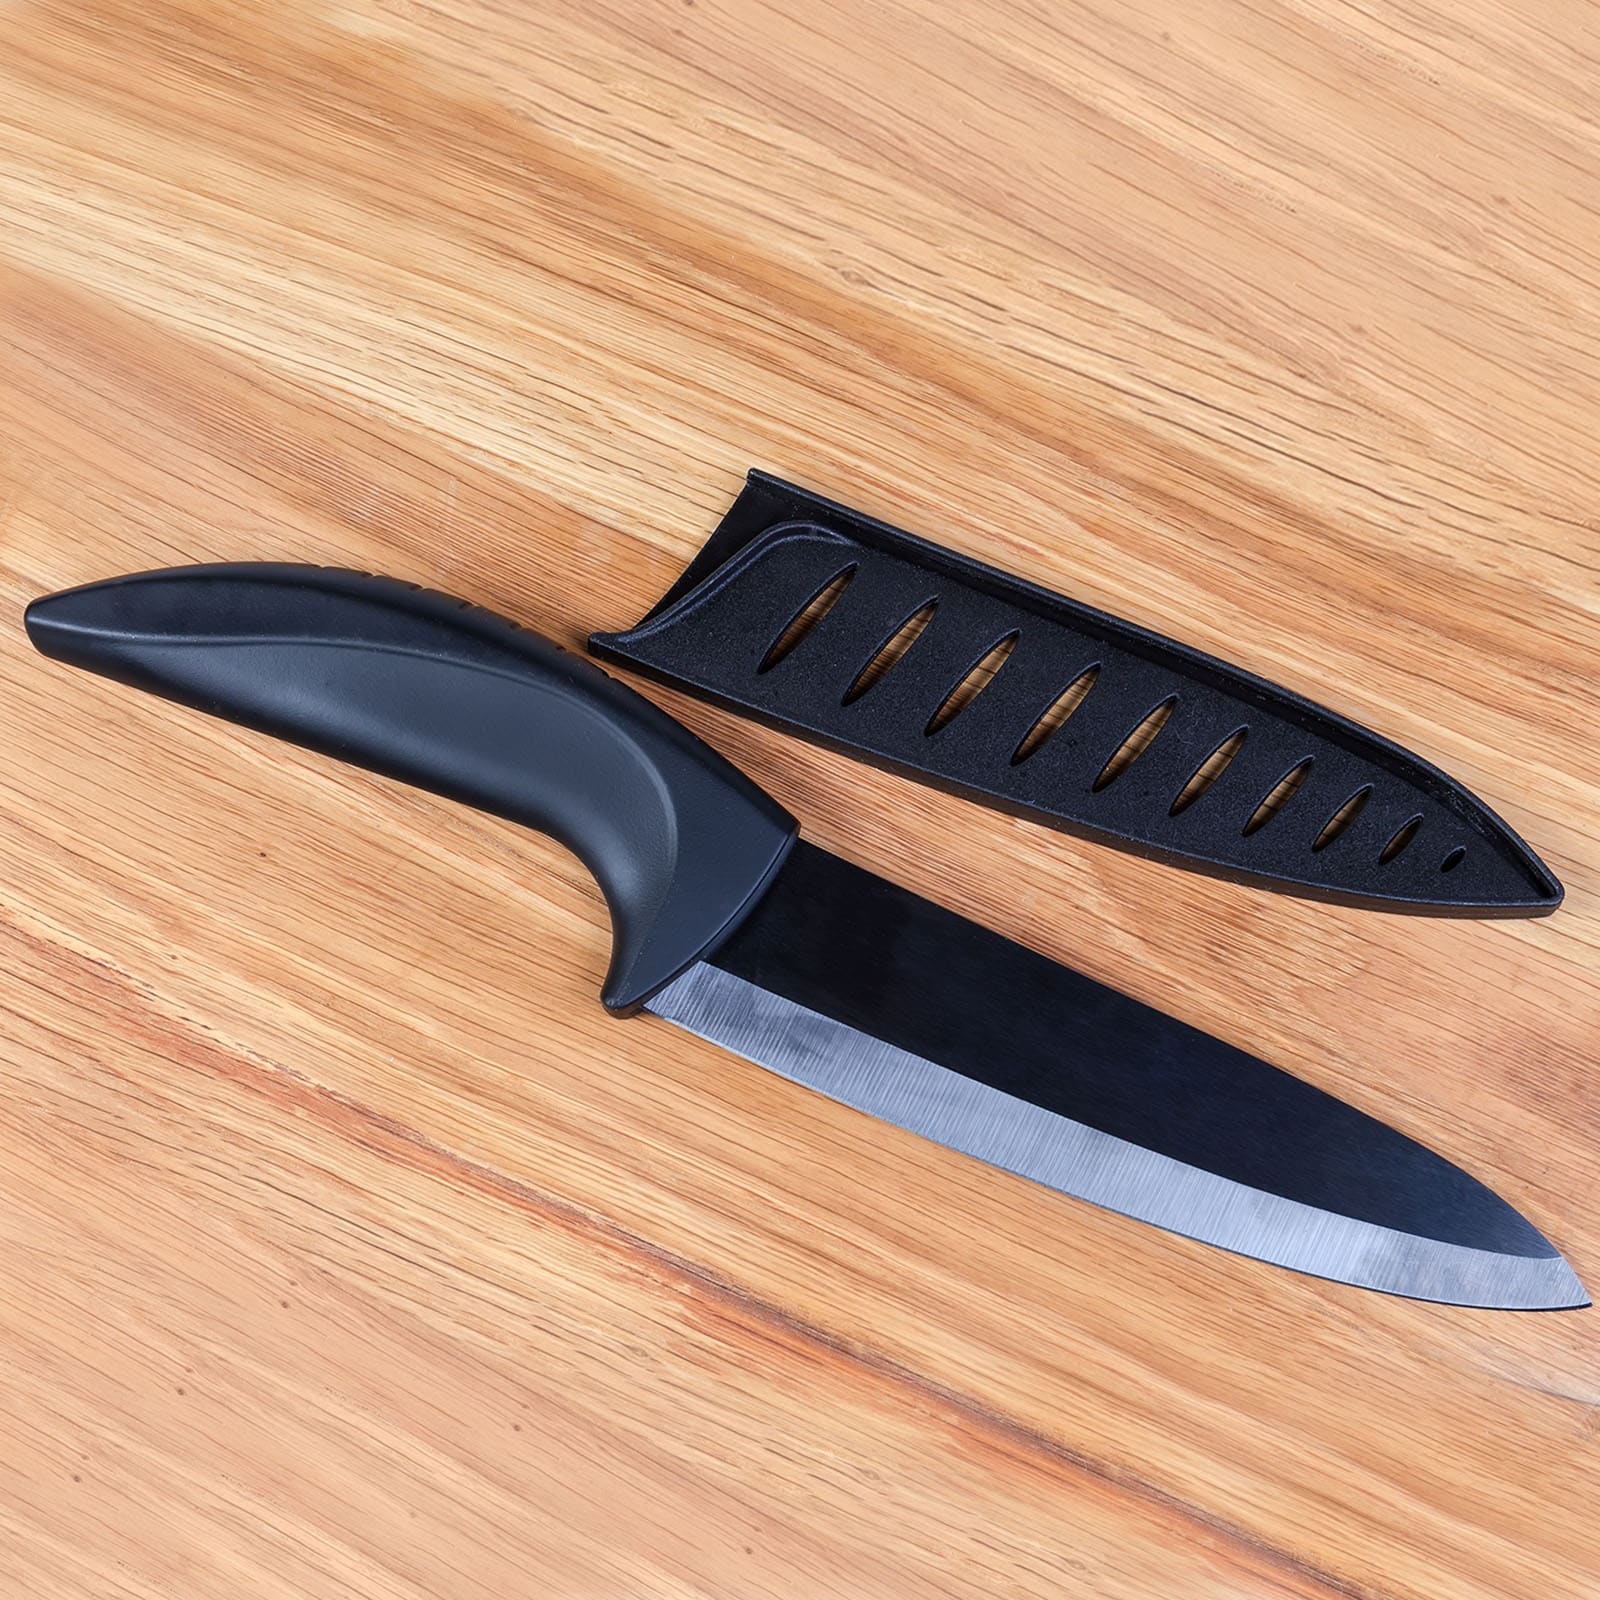 Plastic Kitchen Knife Sheath Cover Sleeves for 8 Carving Knife - Black -  On Sale - Bed Bath & Beyond - 37922103